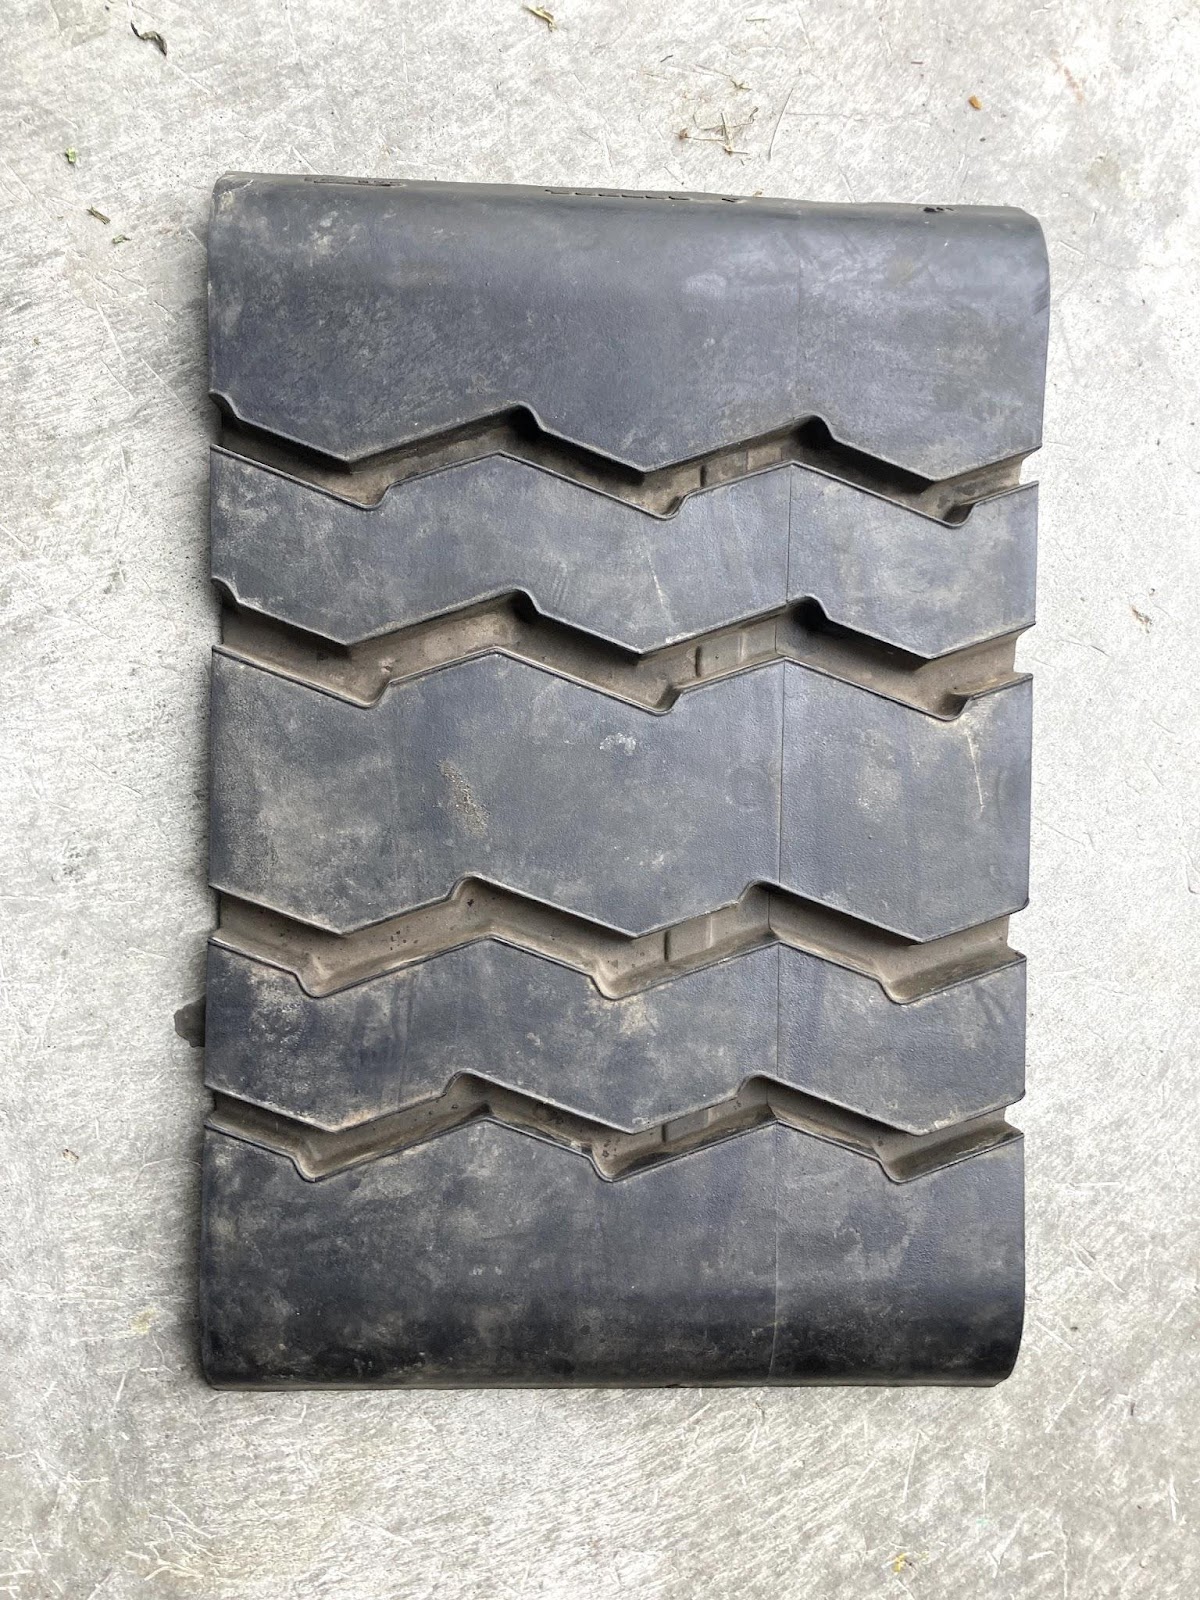 This is a small 12-inch cut of a "cap retread". This picture shows the outer layer of this rubber piece. 